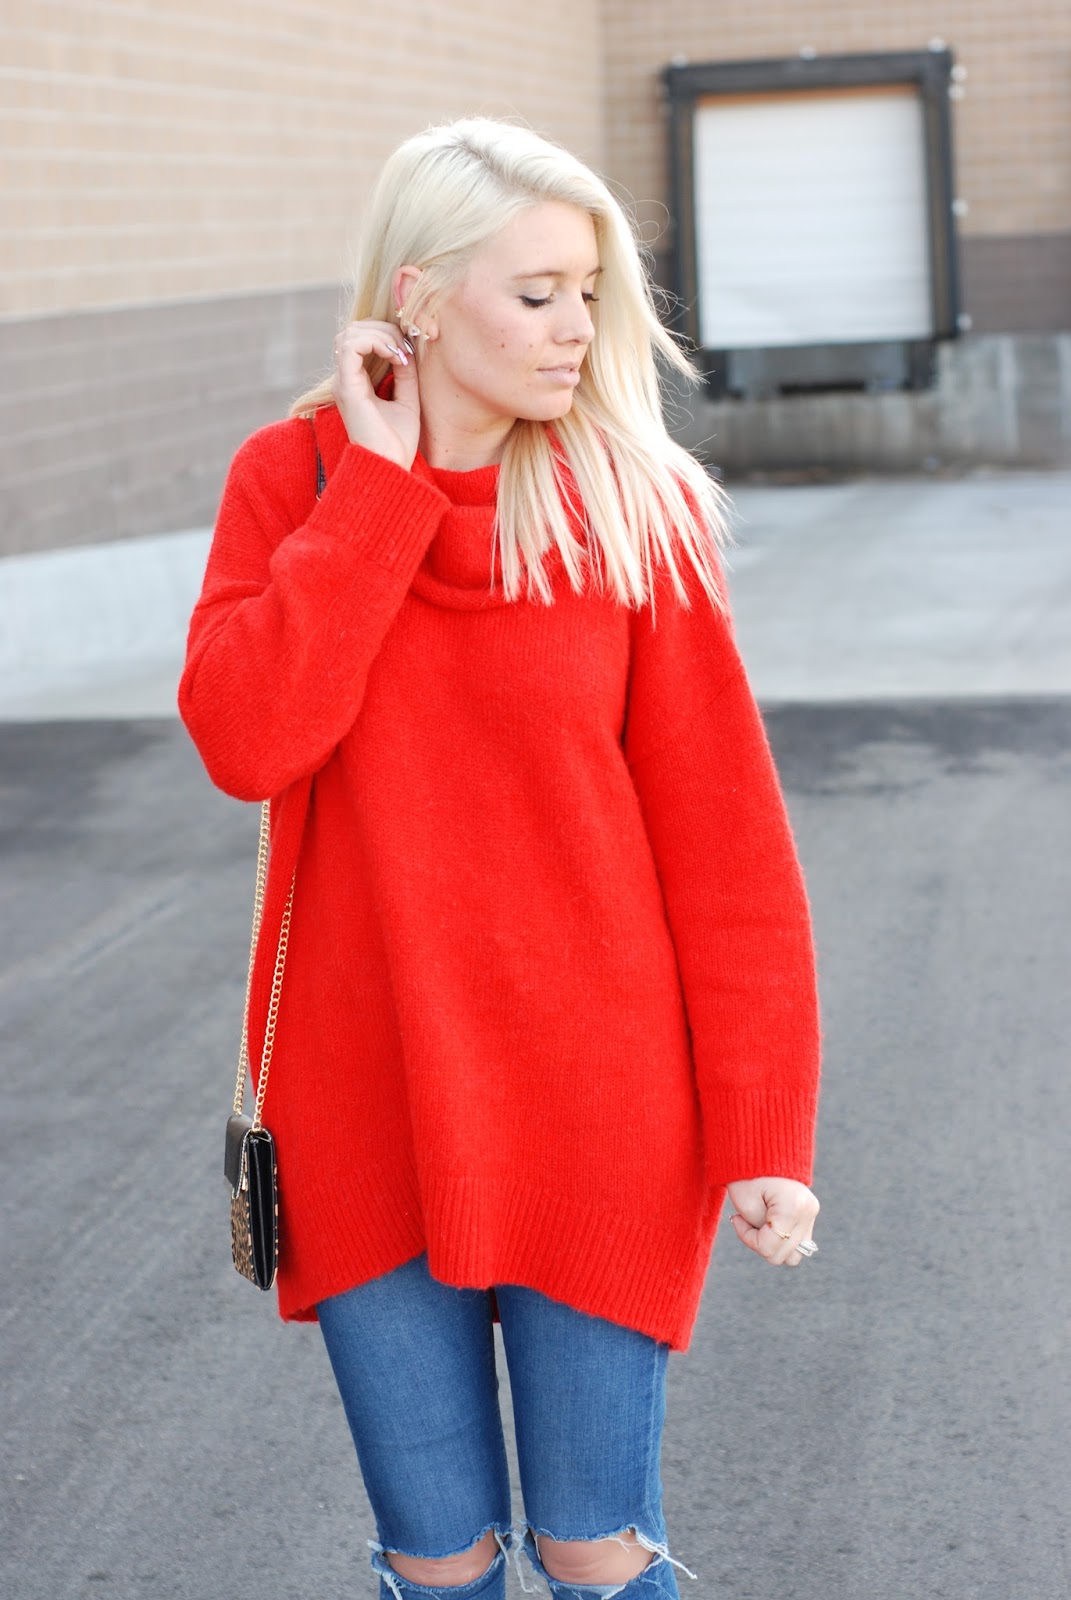 SUPERSIZE IT SWEATER STYLE | The Red Closet Diary